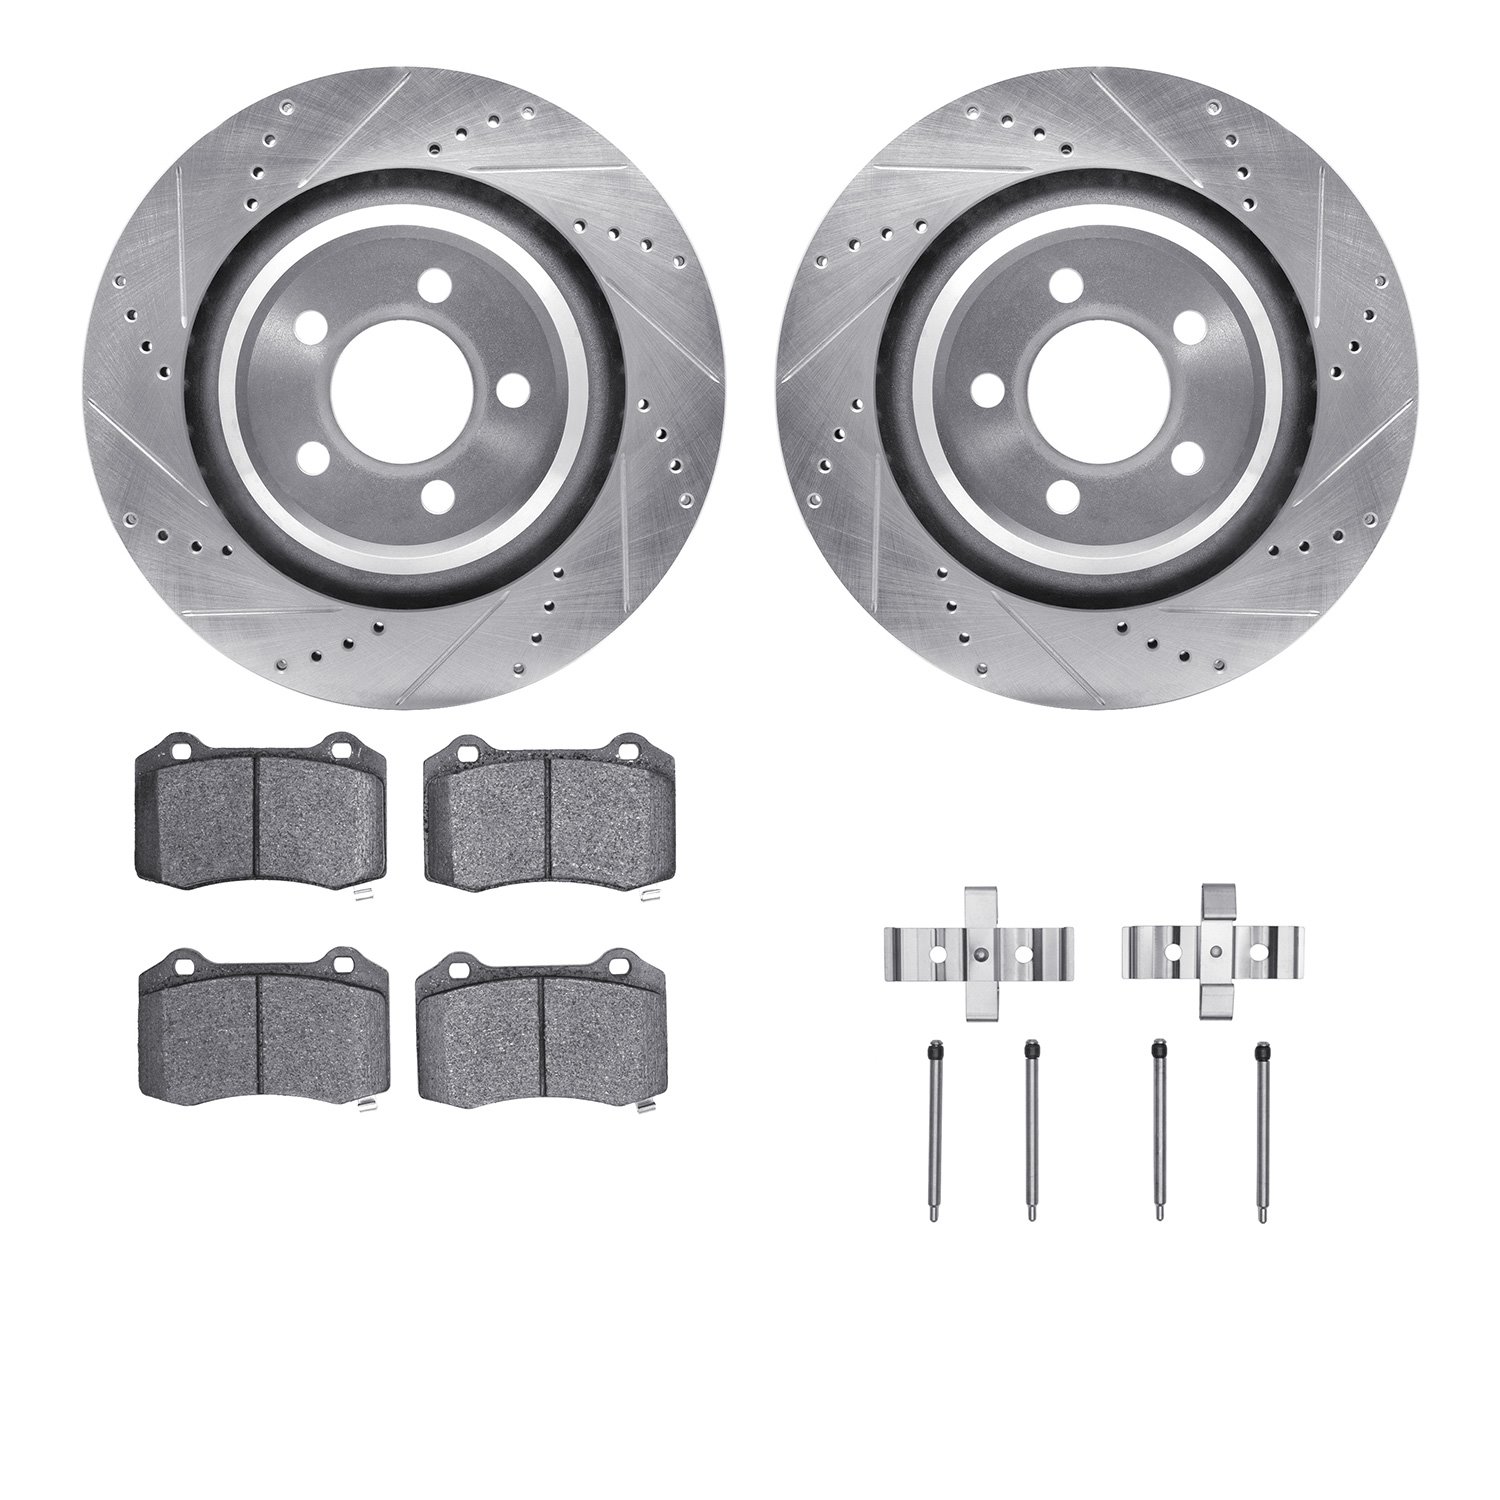 7412-39002 Drilled/Slotted Brake Rotors with Ultimate-Duty Brake Pads Kit & Hardware [Silver], Fits Select Mopar, Position: Rear